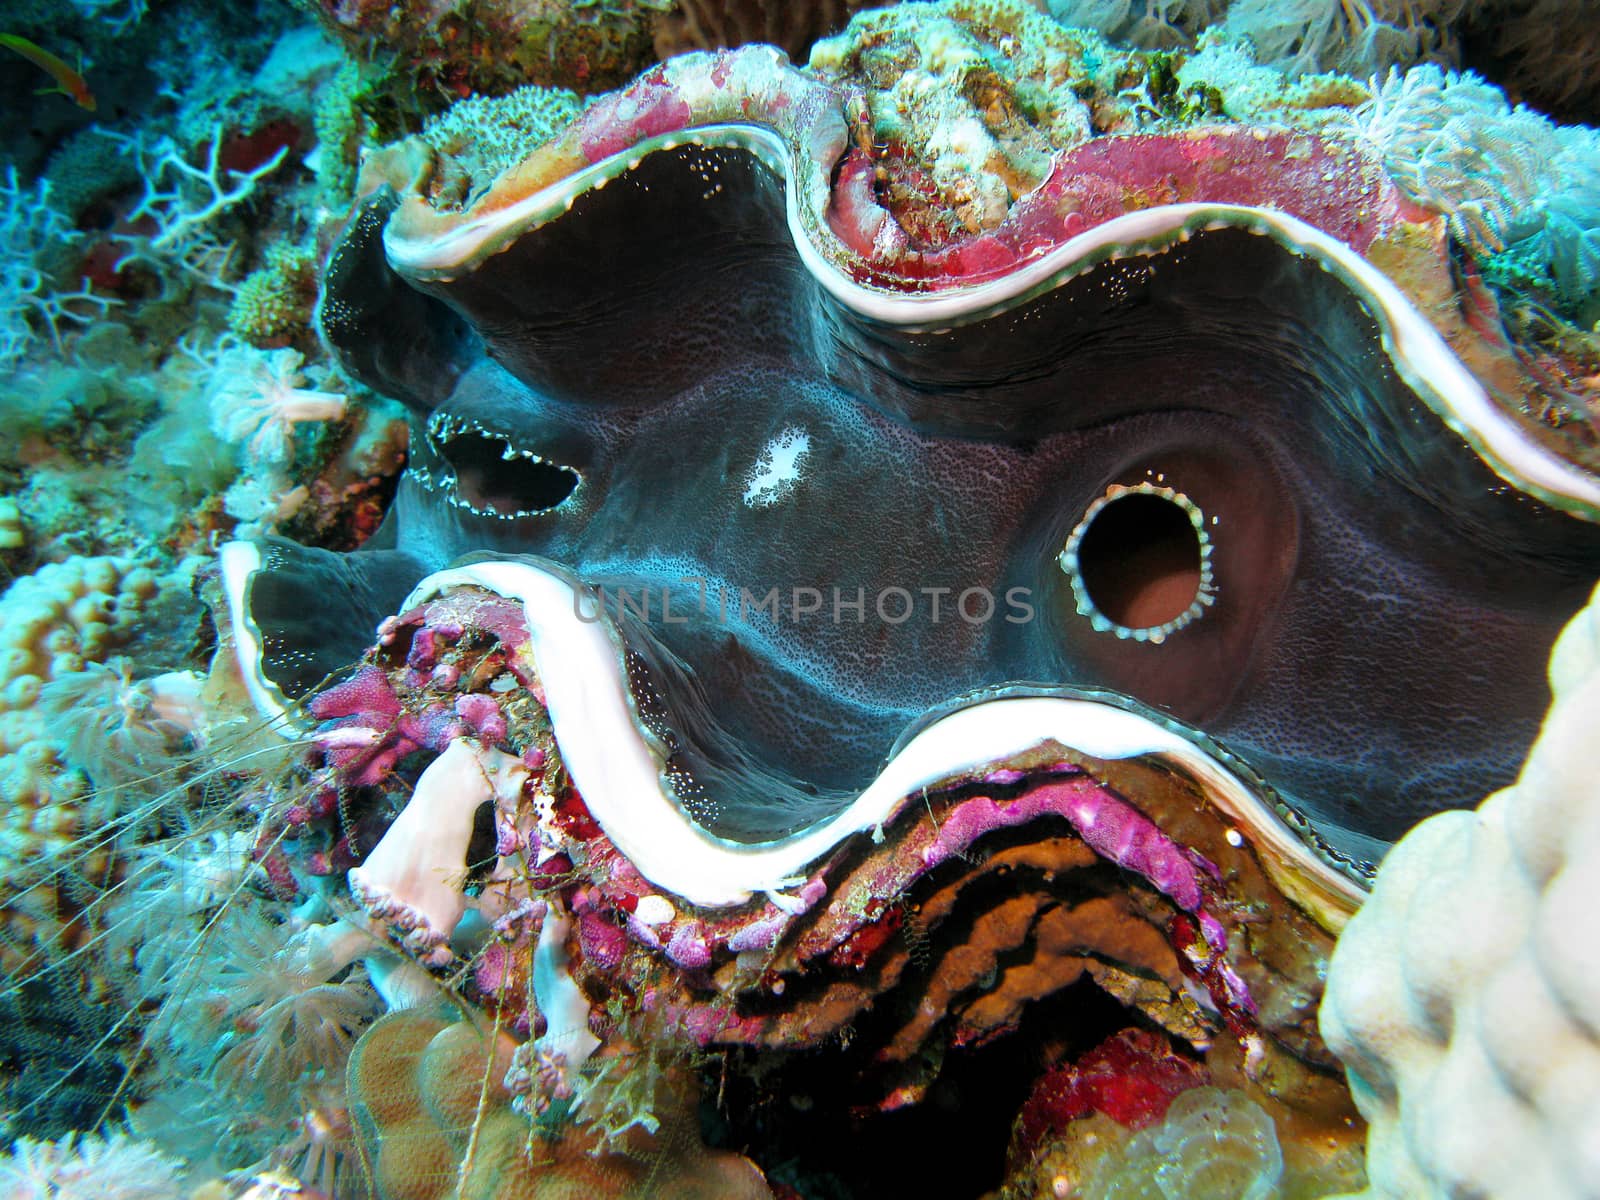 coral reef with giant clam - Tridacna gigas at the bottom of tropical sea - close up by mychadre77